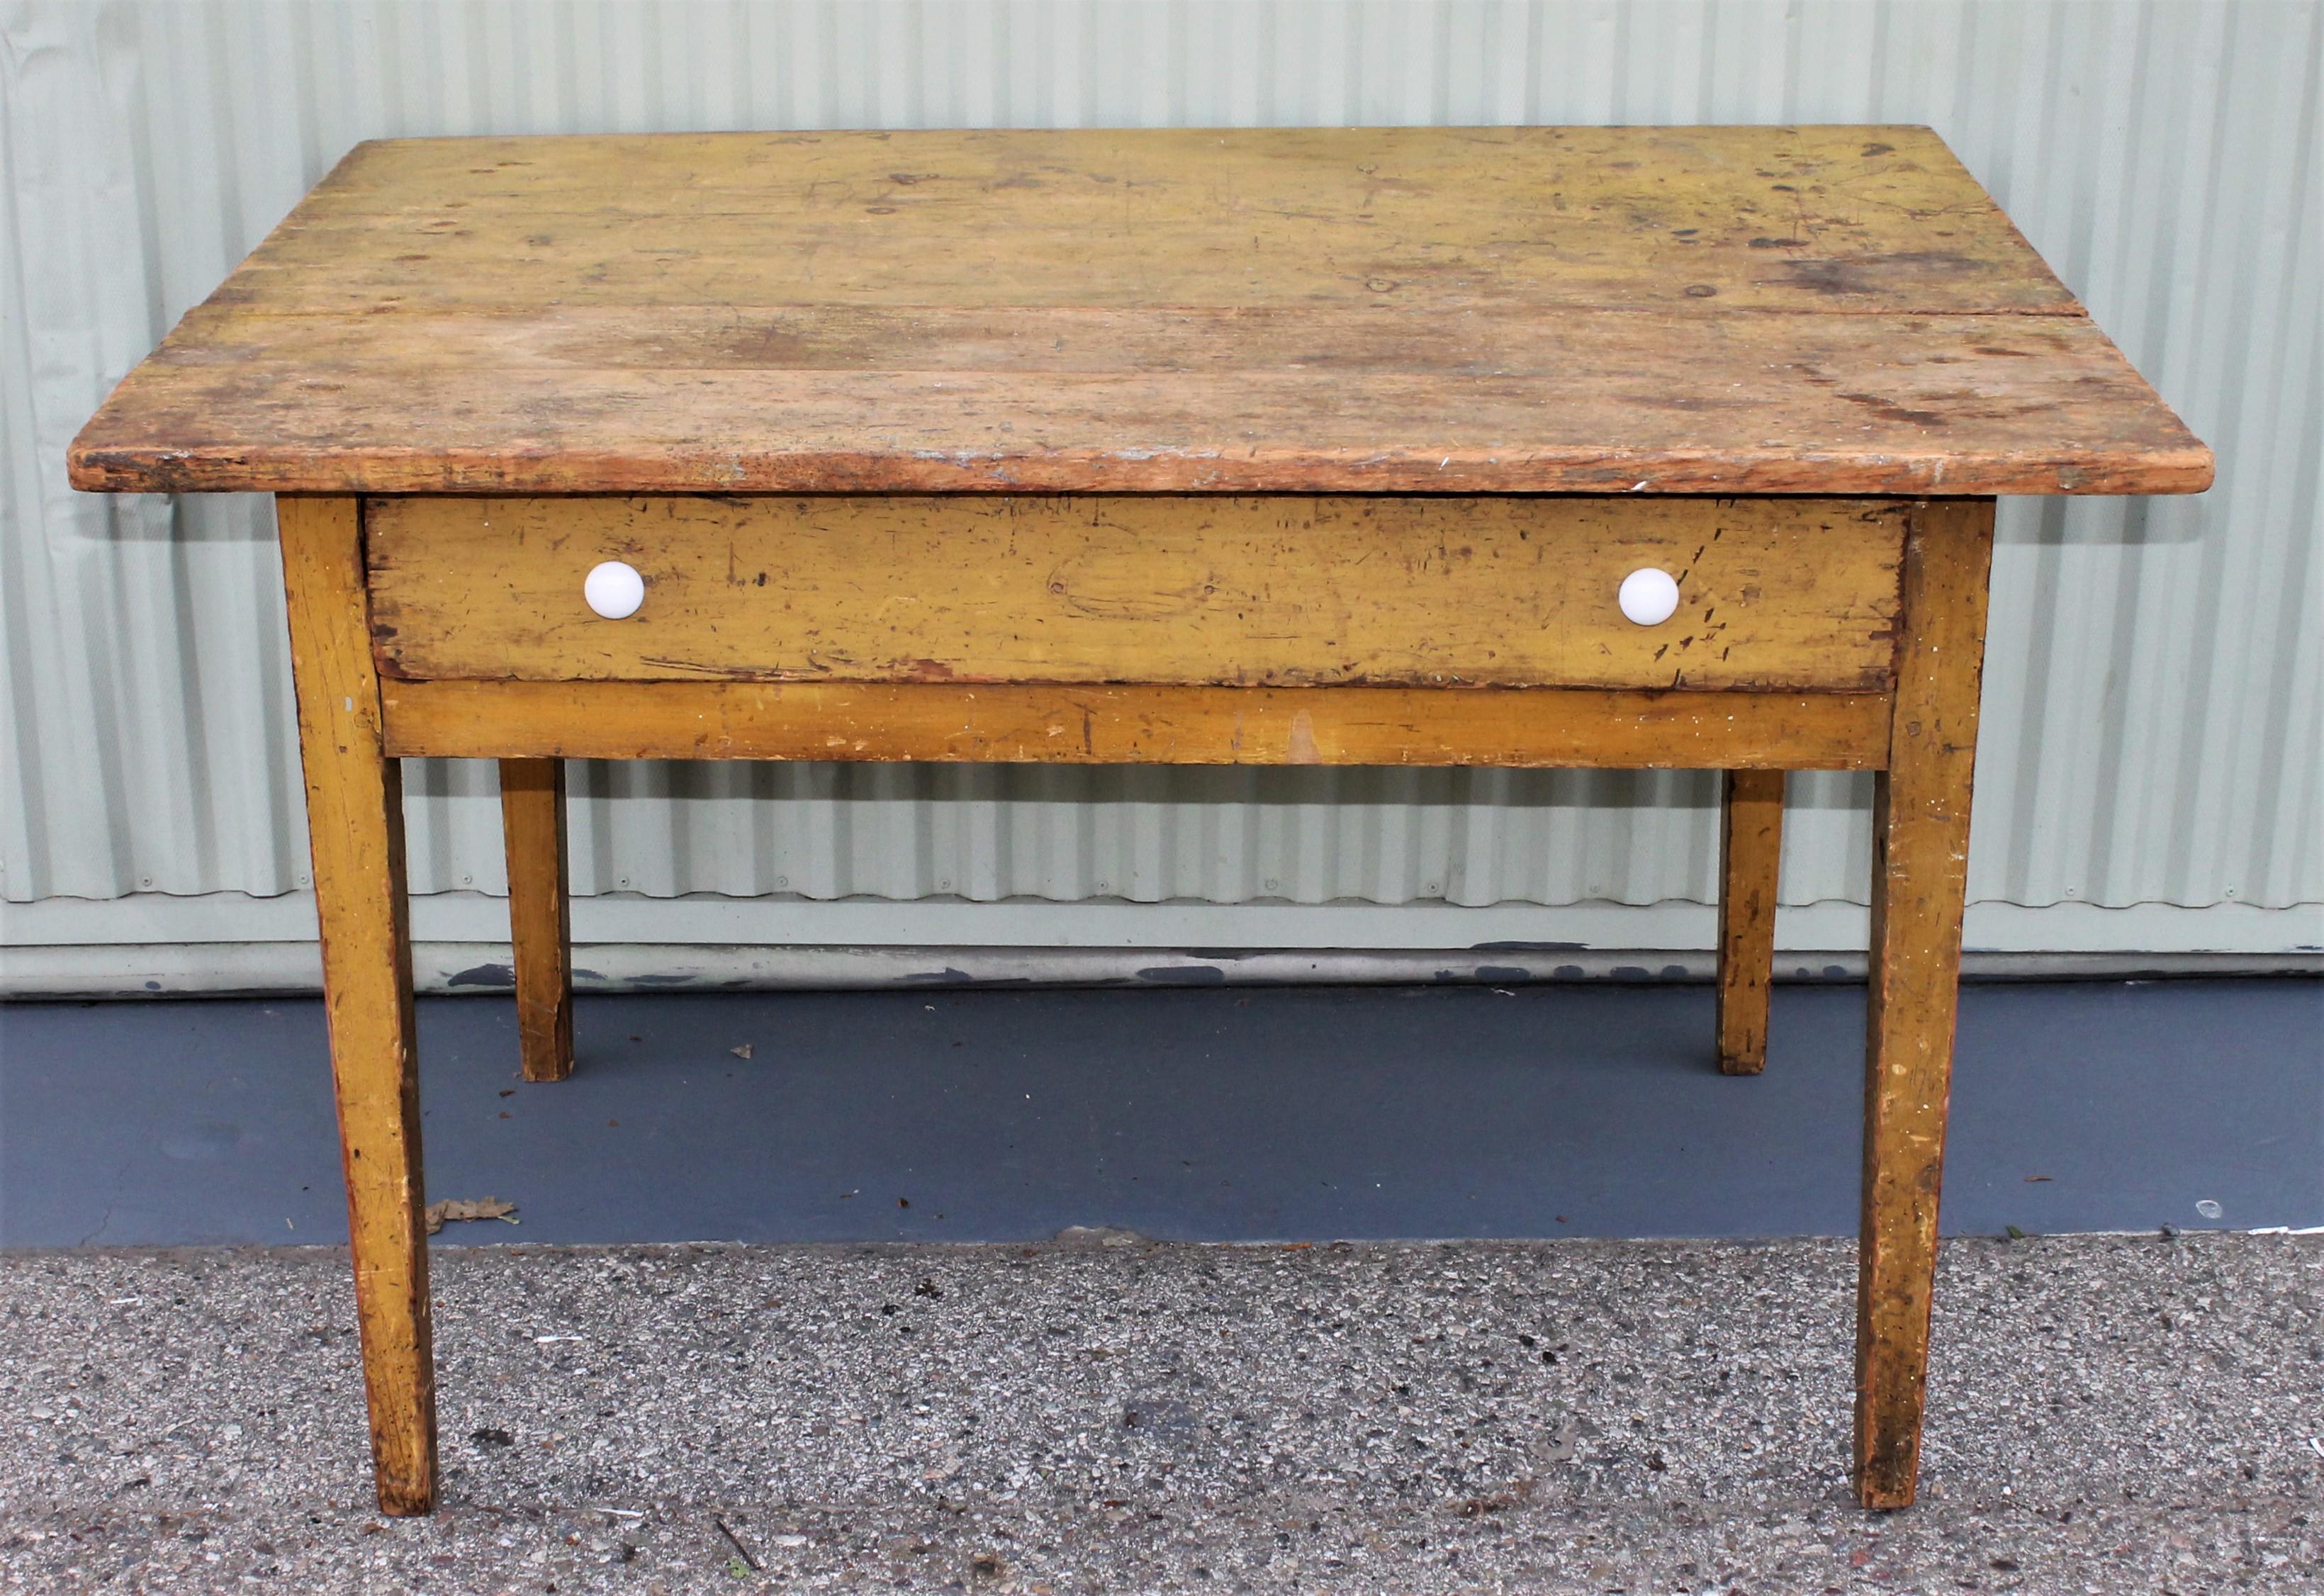 This 19th century original mustard painted farm table with large drawer. This table is square nail construction and original porcelain drawer pulls.